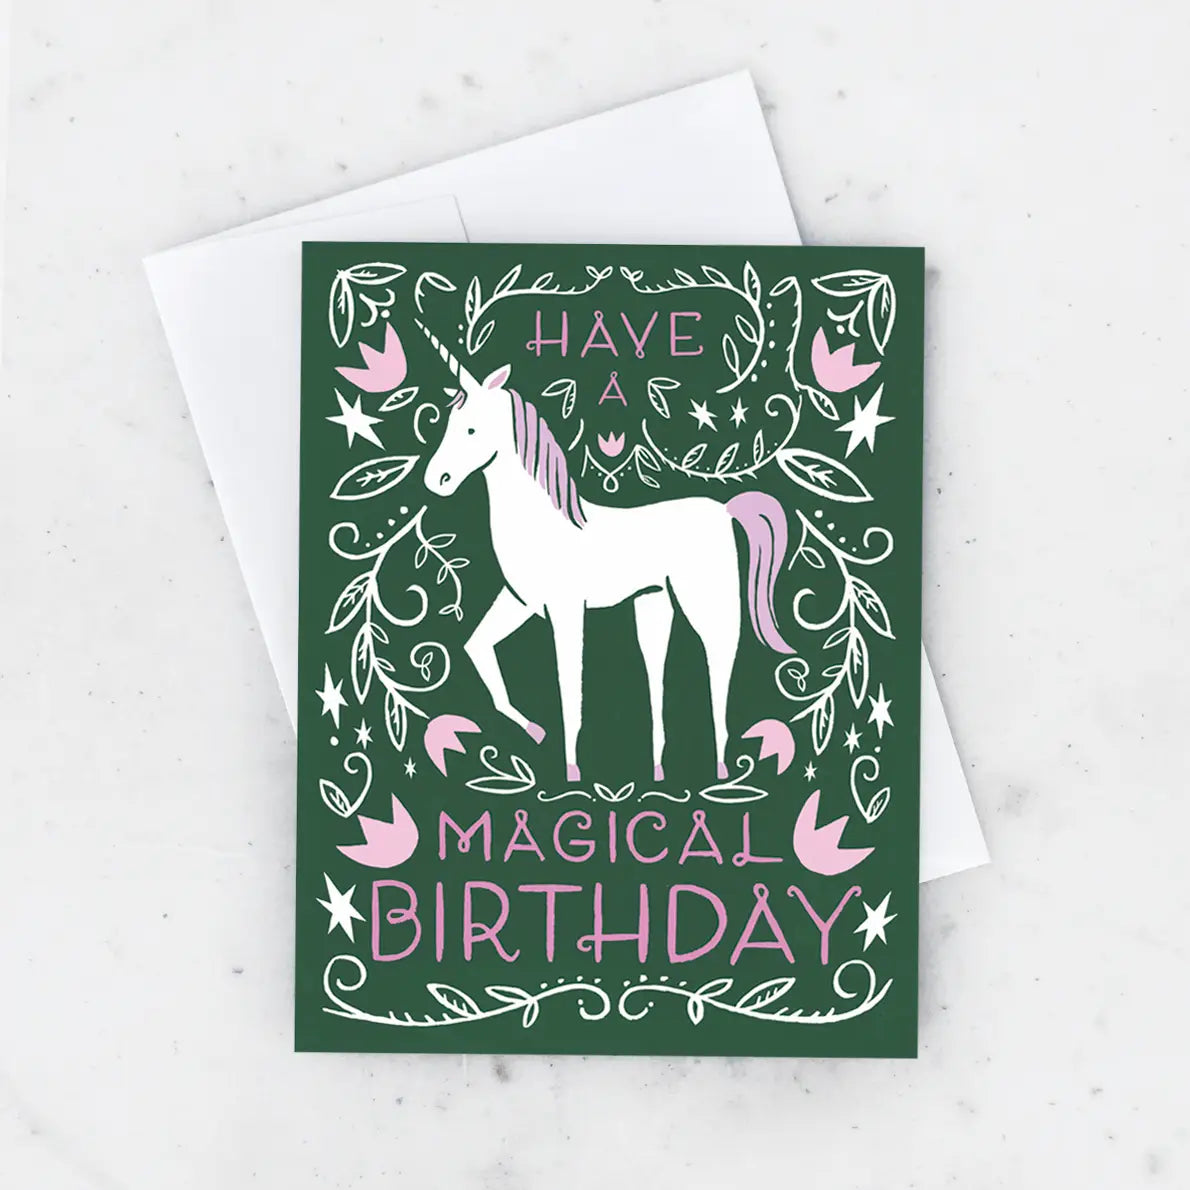 White card with a green background and an illustration of a white unicorn with a pink mane. Pink text reads "have a magical birthday"